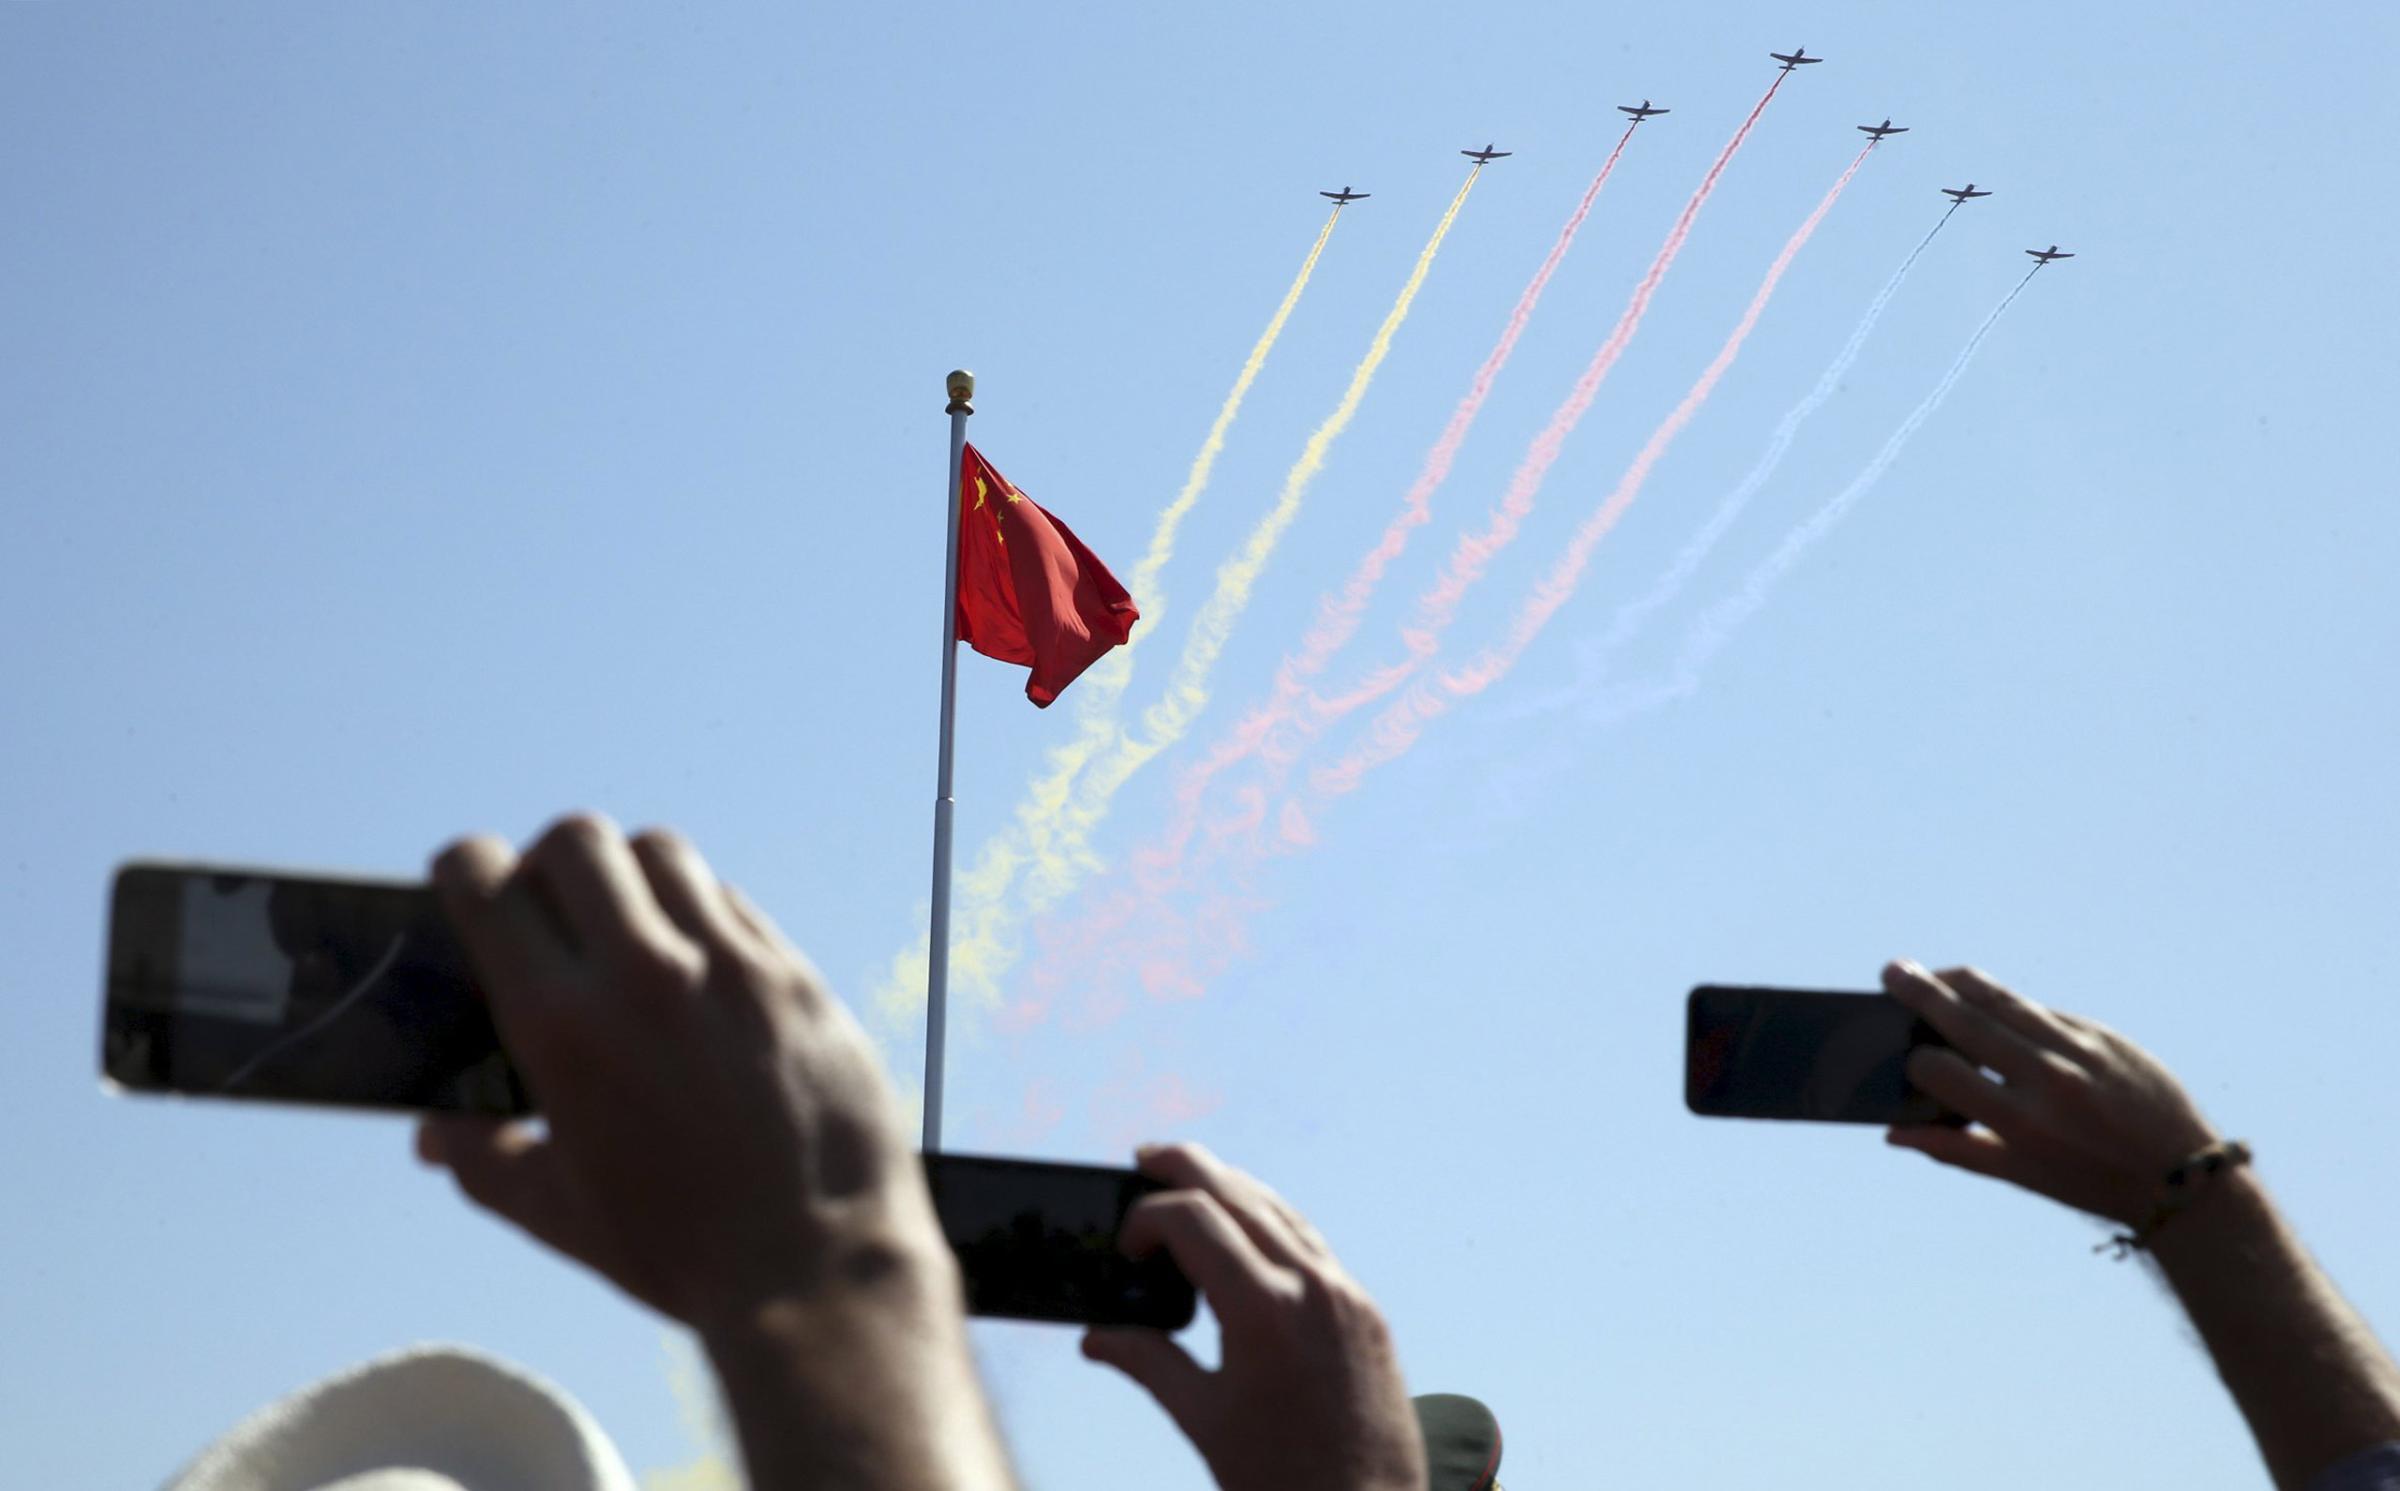 People record trainer jets flying over Tiananmen Square during a military parade to mark the 70th anniversary of the end of World War Two, in Beijing, China, September 3, 2015. REUTERS/China Daily CHINA OUT. NO COMMERCIAL OR EDITORIAL SALES IN CHINA TPX IMAGES OF THE DAY